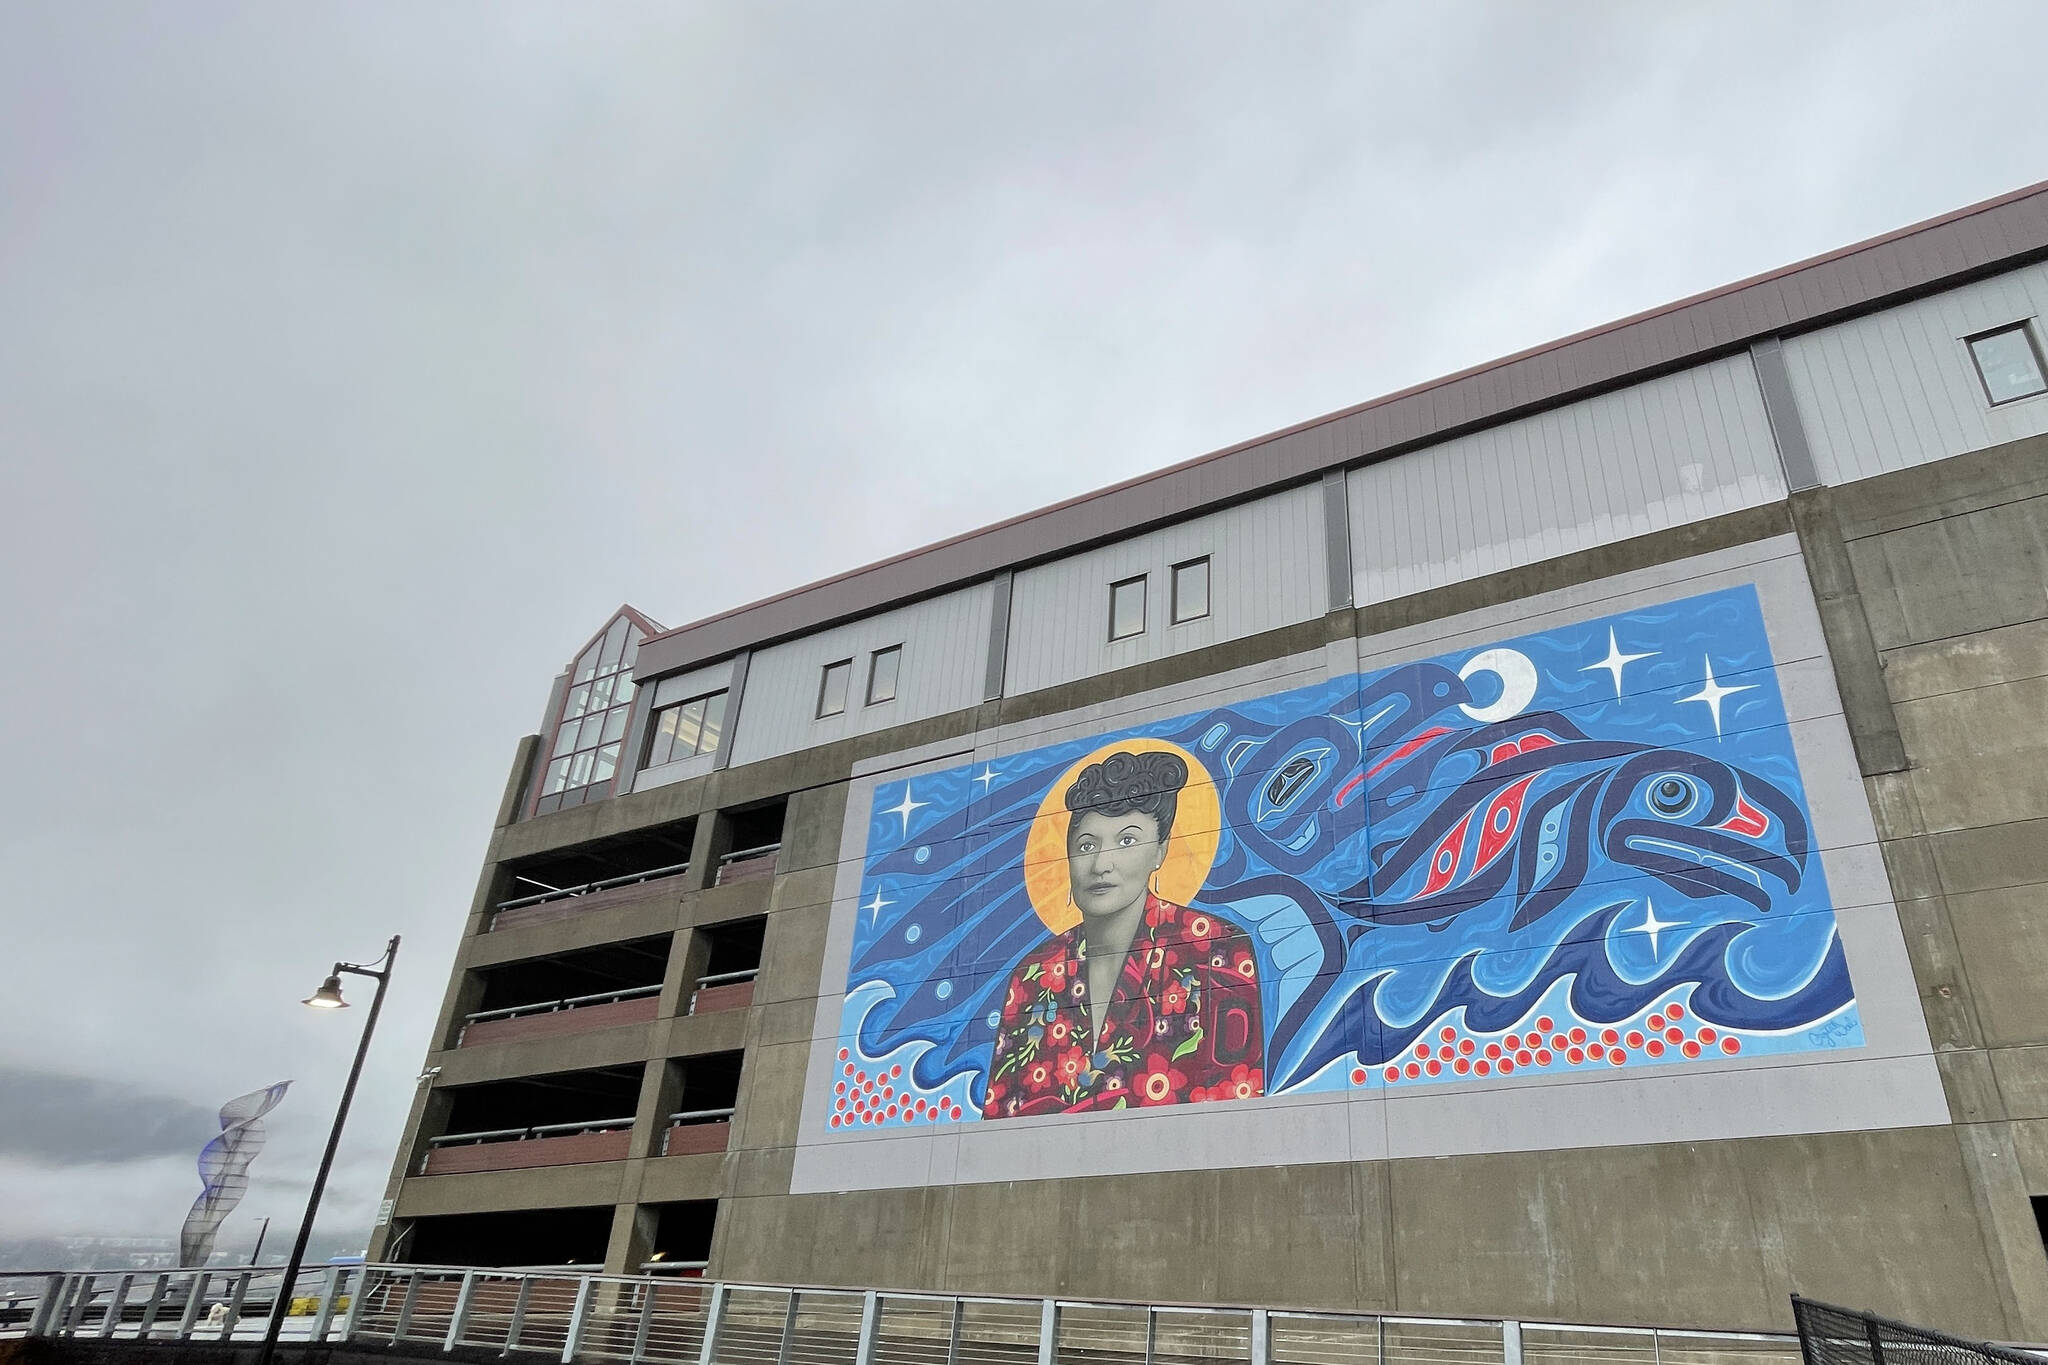 Elizabeth Kaaxgal.aat Peratrovich’s legacy is strong in Juneau, where a recently finished mural and renamed plaza help honor the memory of the civil rights activist. (Michael S. Lockett / Juneau Empire)